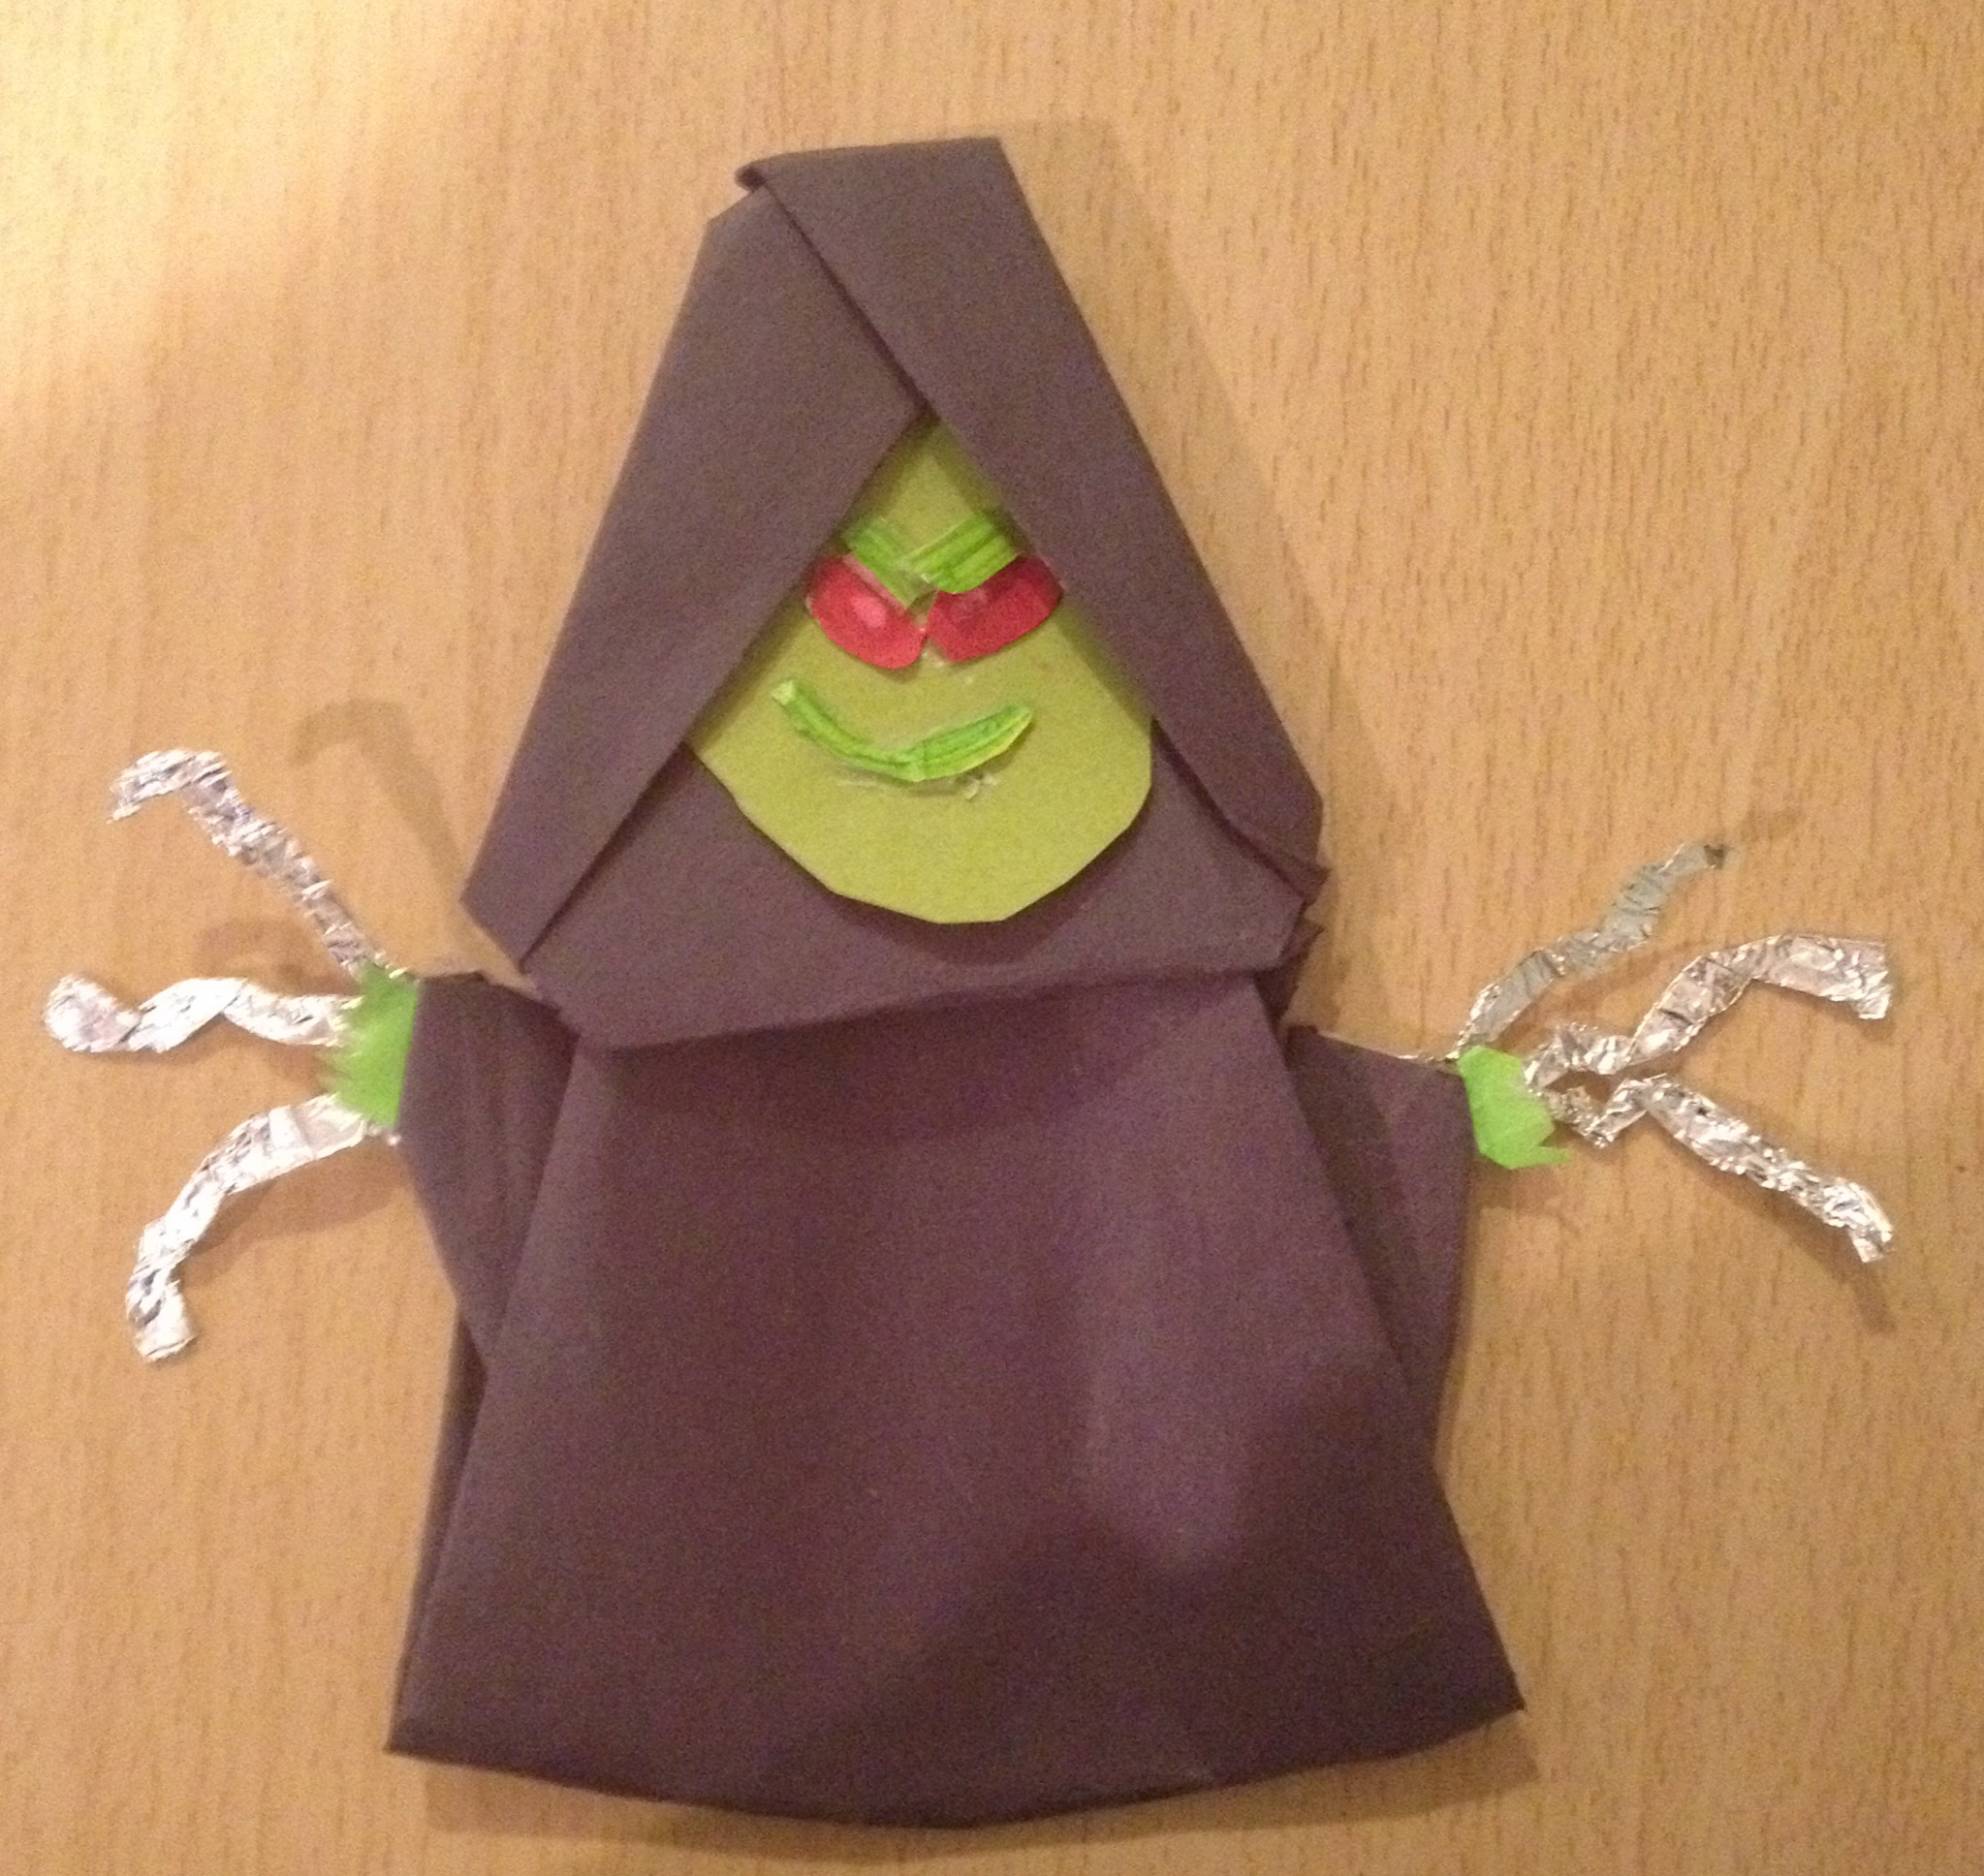 How To Make Origami Emperor Palpatine Cover Emperor Pickletine Wiztrons Origami